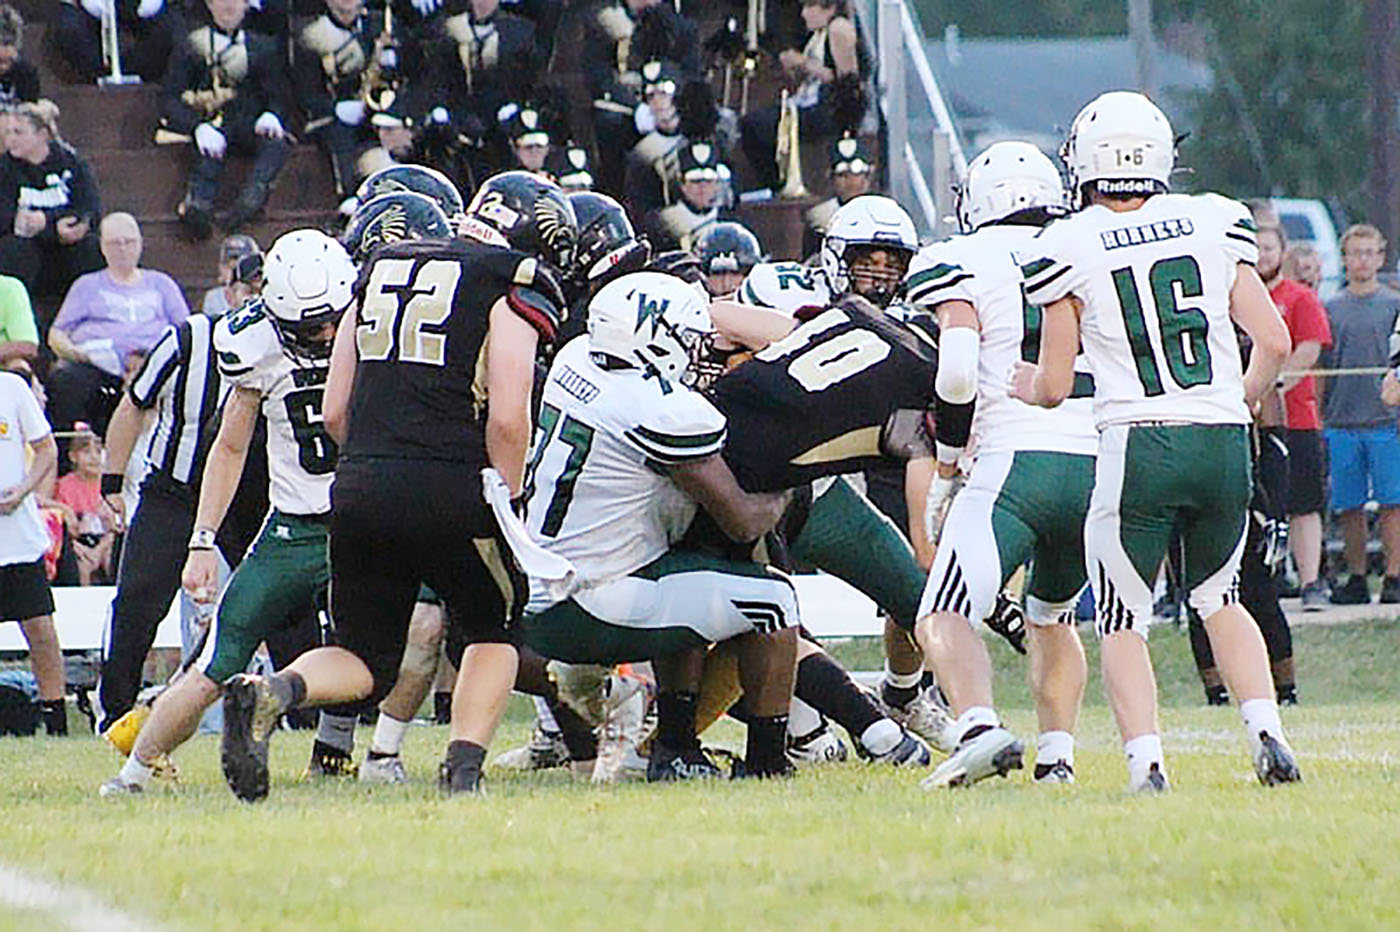 Westran’s Tarayle Wallace (77) and teammates swarm to tackle a Fayette fullback D.J. Moore (40) during Friday’s game in Fayette. The Falcons topped the Hornets, 21-18.